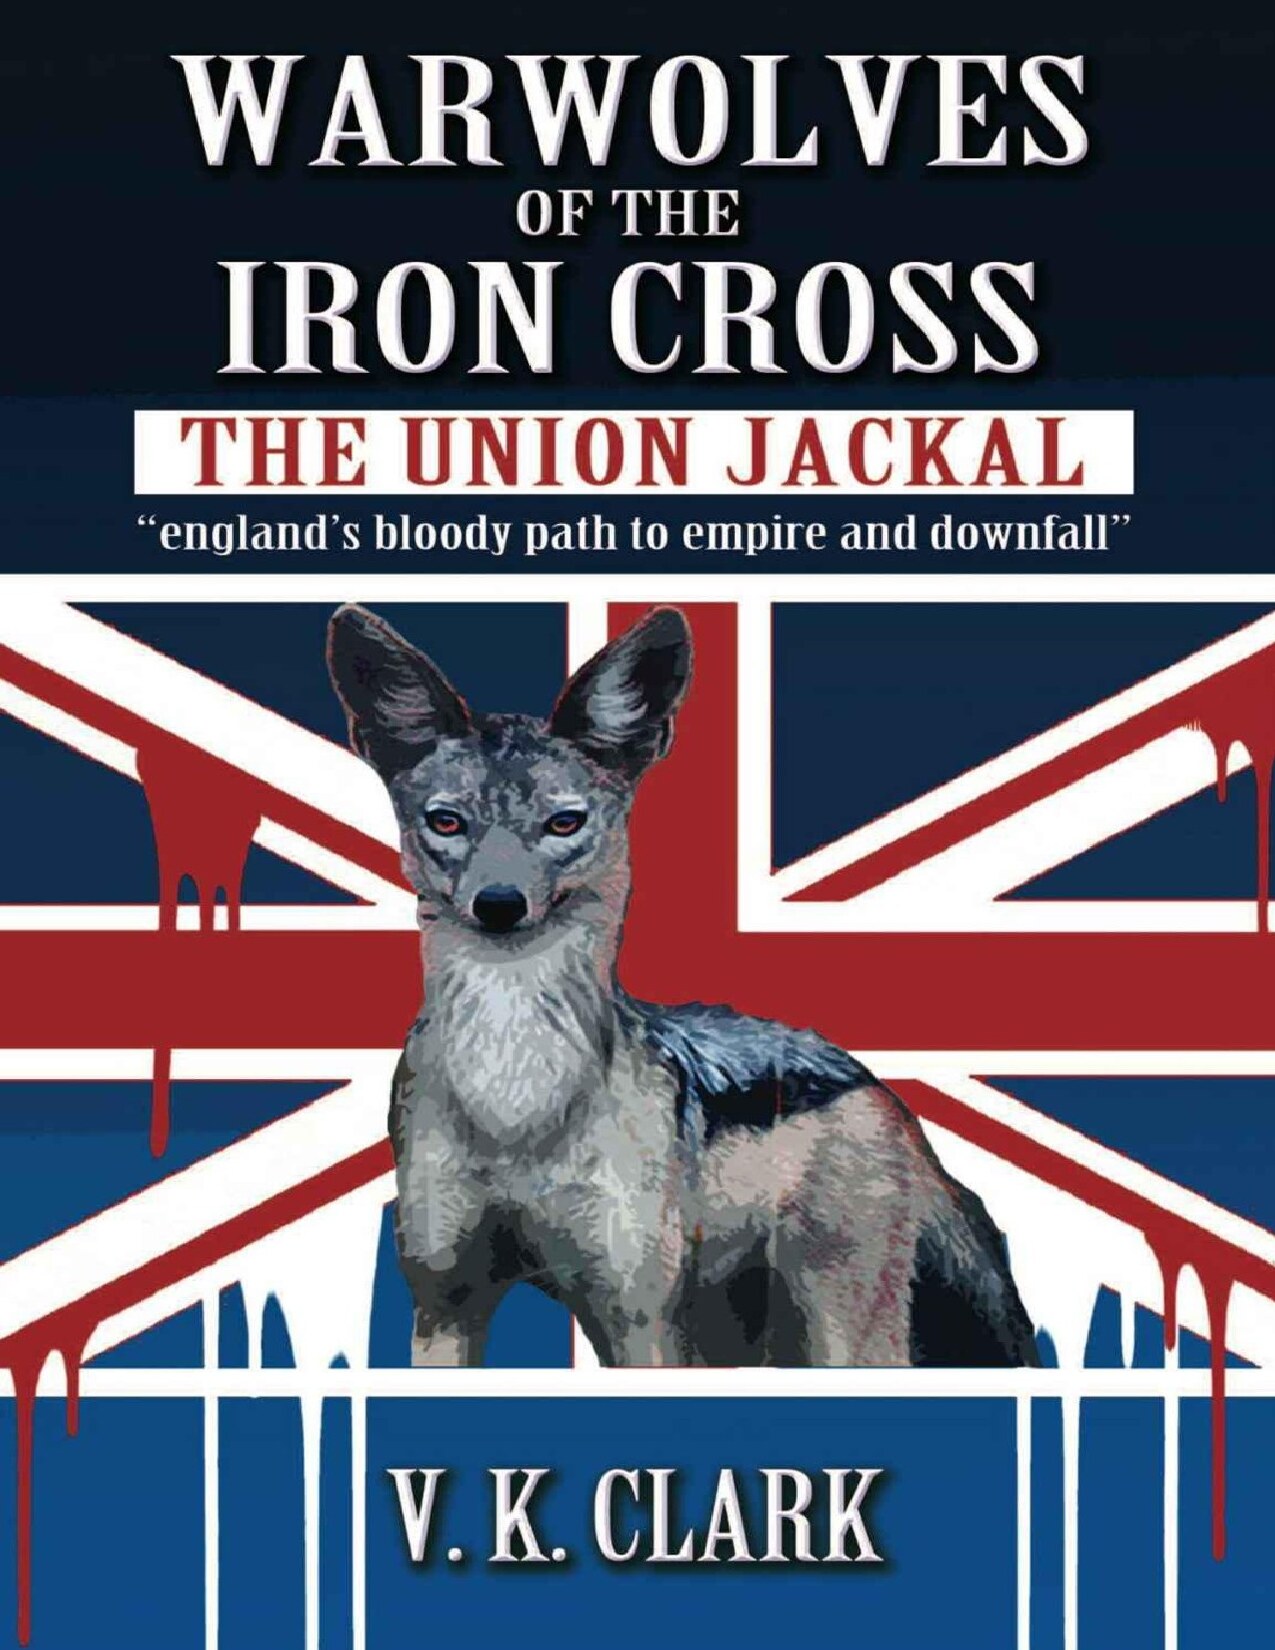 Warwolves of the Iron Cross: The Union Jackal: "england's bloody path to empire and downfall" (Wehrwolf Book 4)